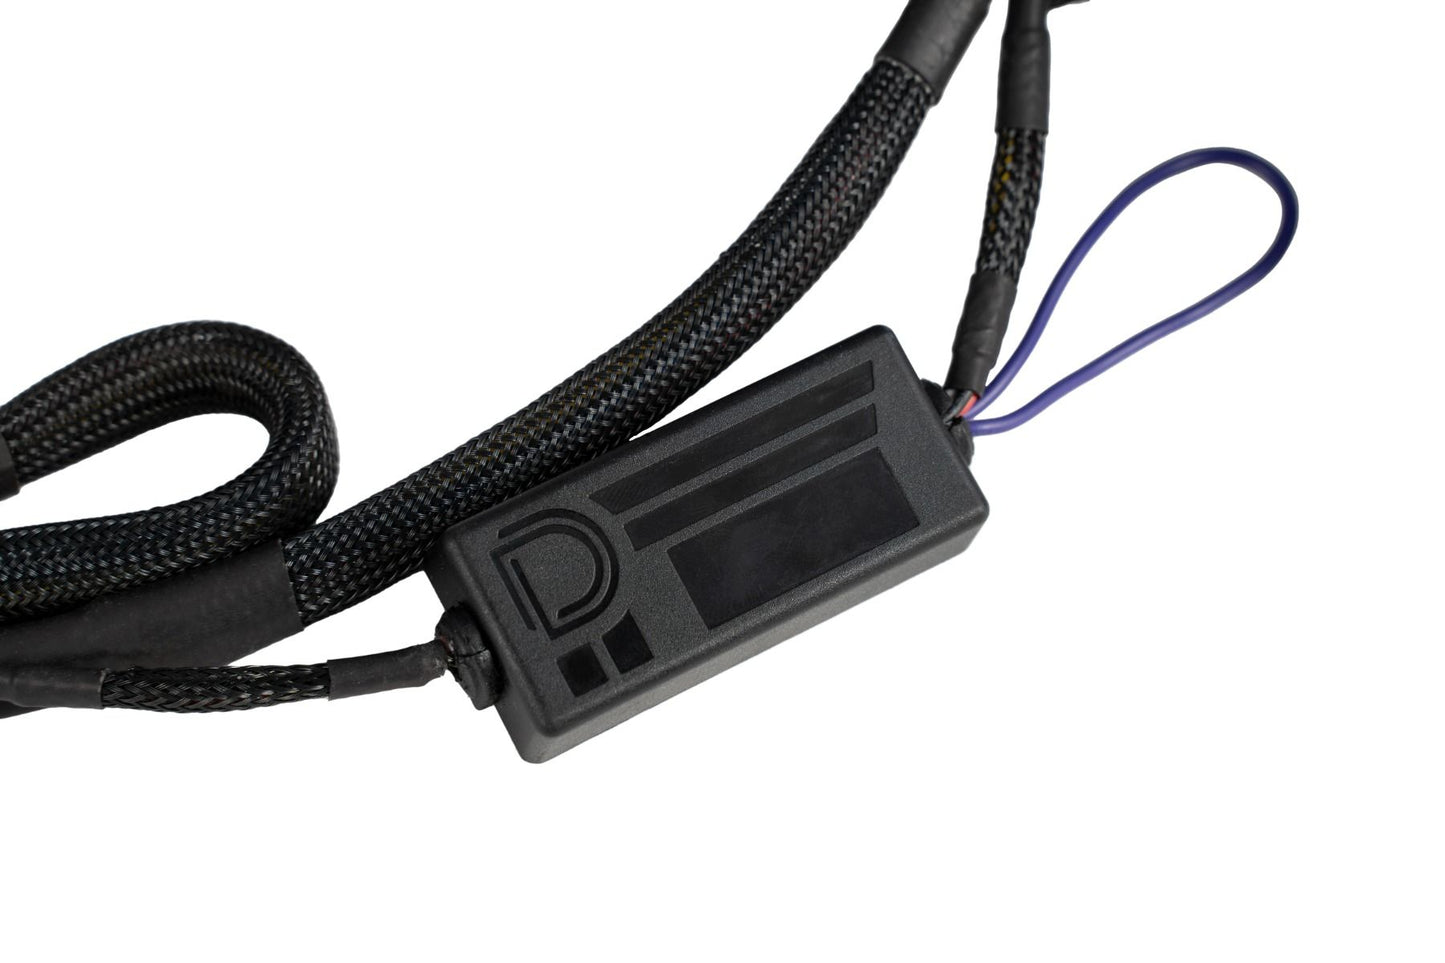 Stage Series C1R 7-pin Dual-Output Trailer Wiring Harness